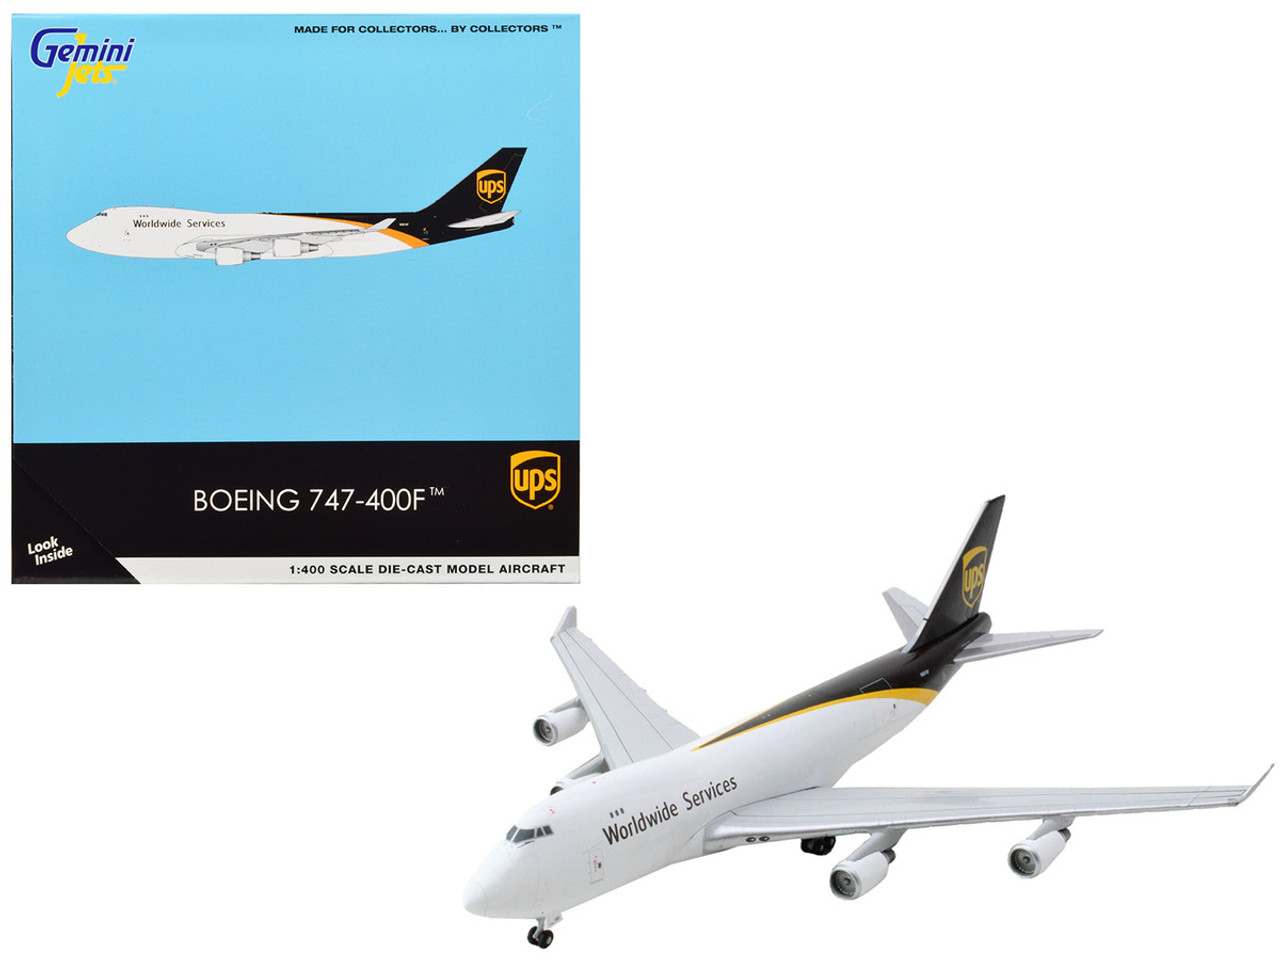 Boeing 747-400F Commercial Aircraft "UPS Worldwide Services" White with Brown Tail 1/400 Diecast Model Airplane by GeminiJets